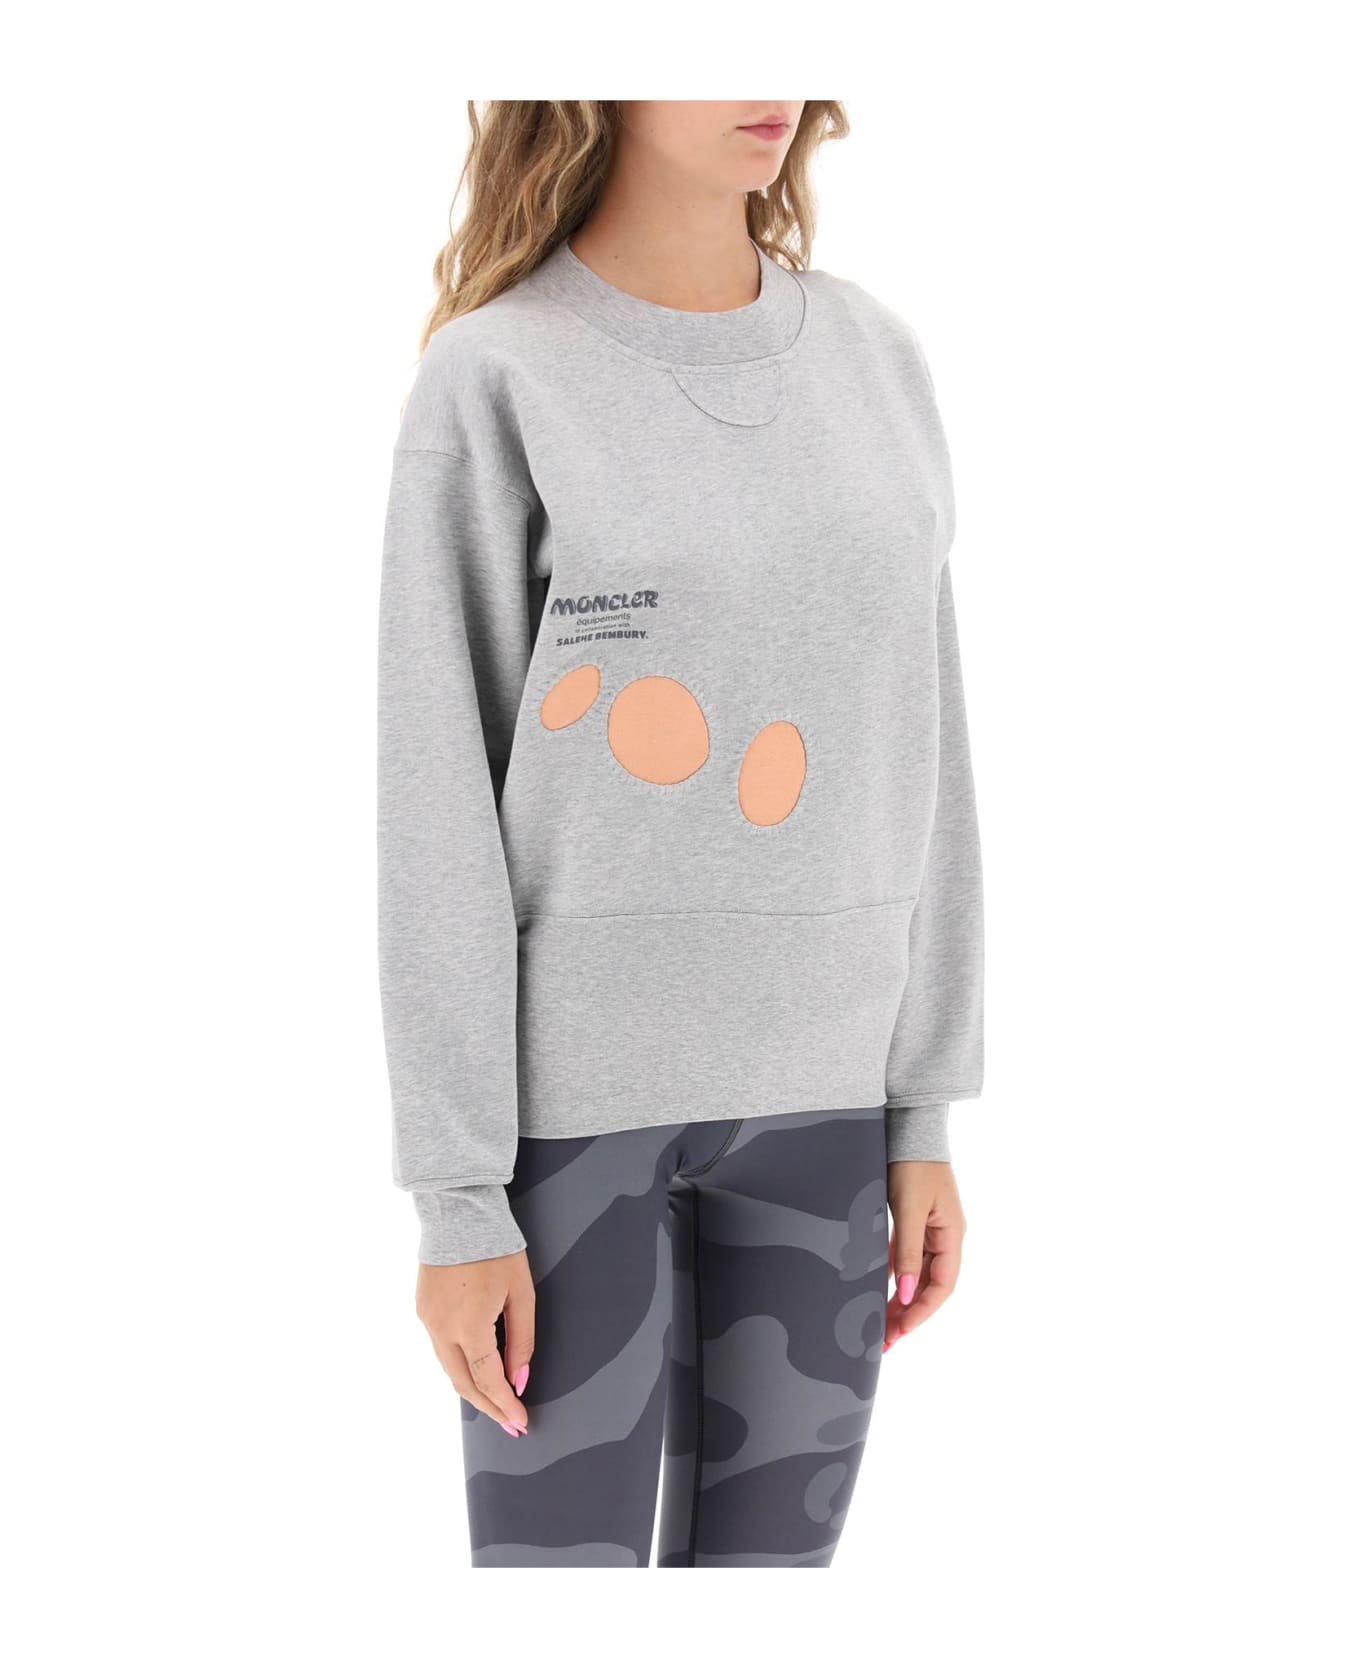 Moncler Genius Sweater With Cut-outs - GREY (Grey)